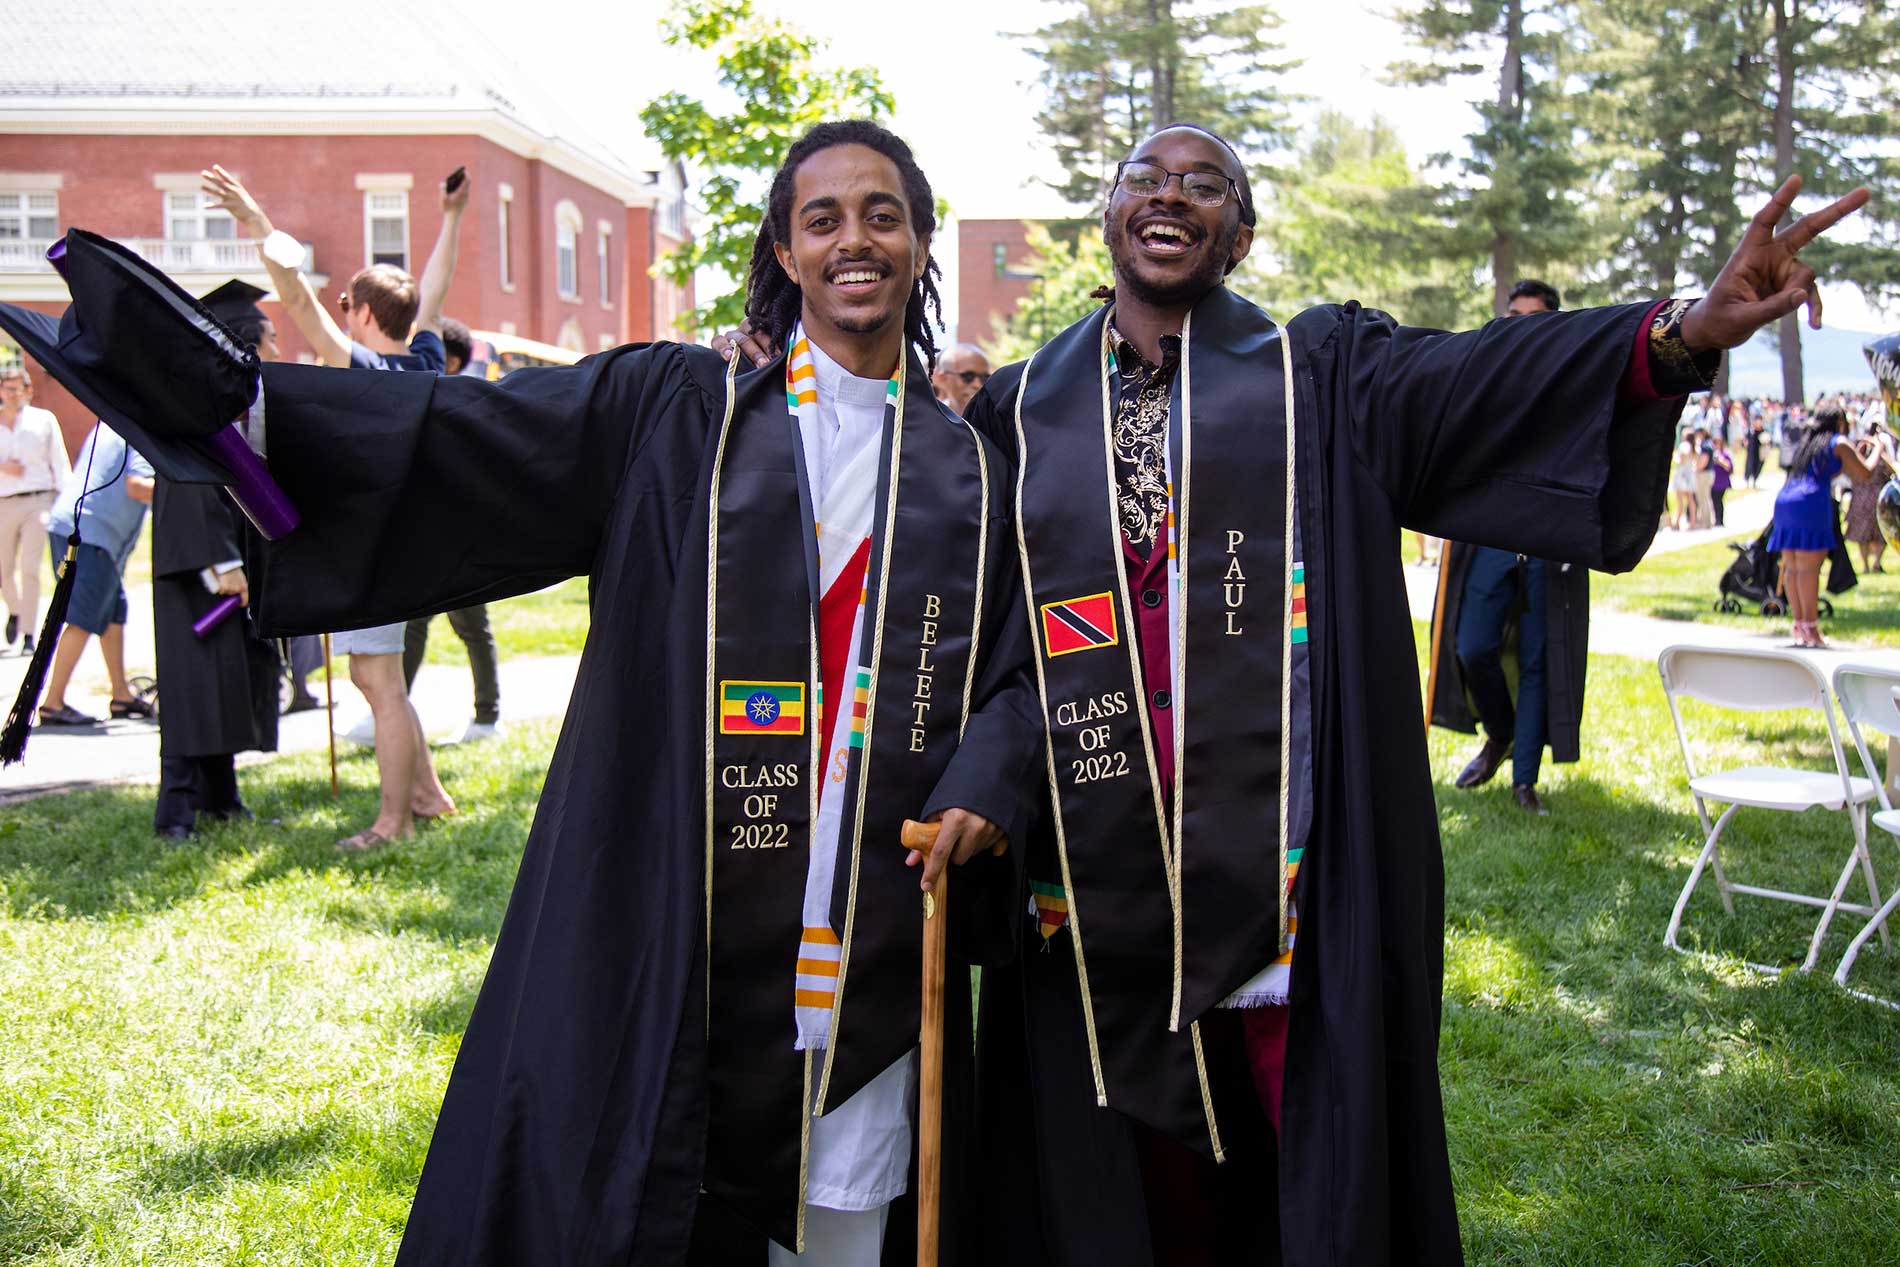 Two young black men pose together, their arms outstretched in celebration.